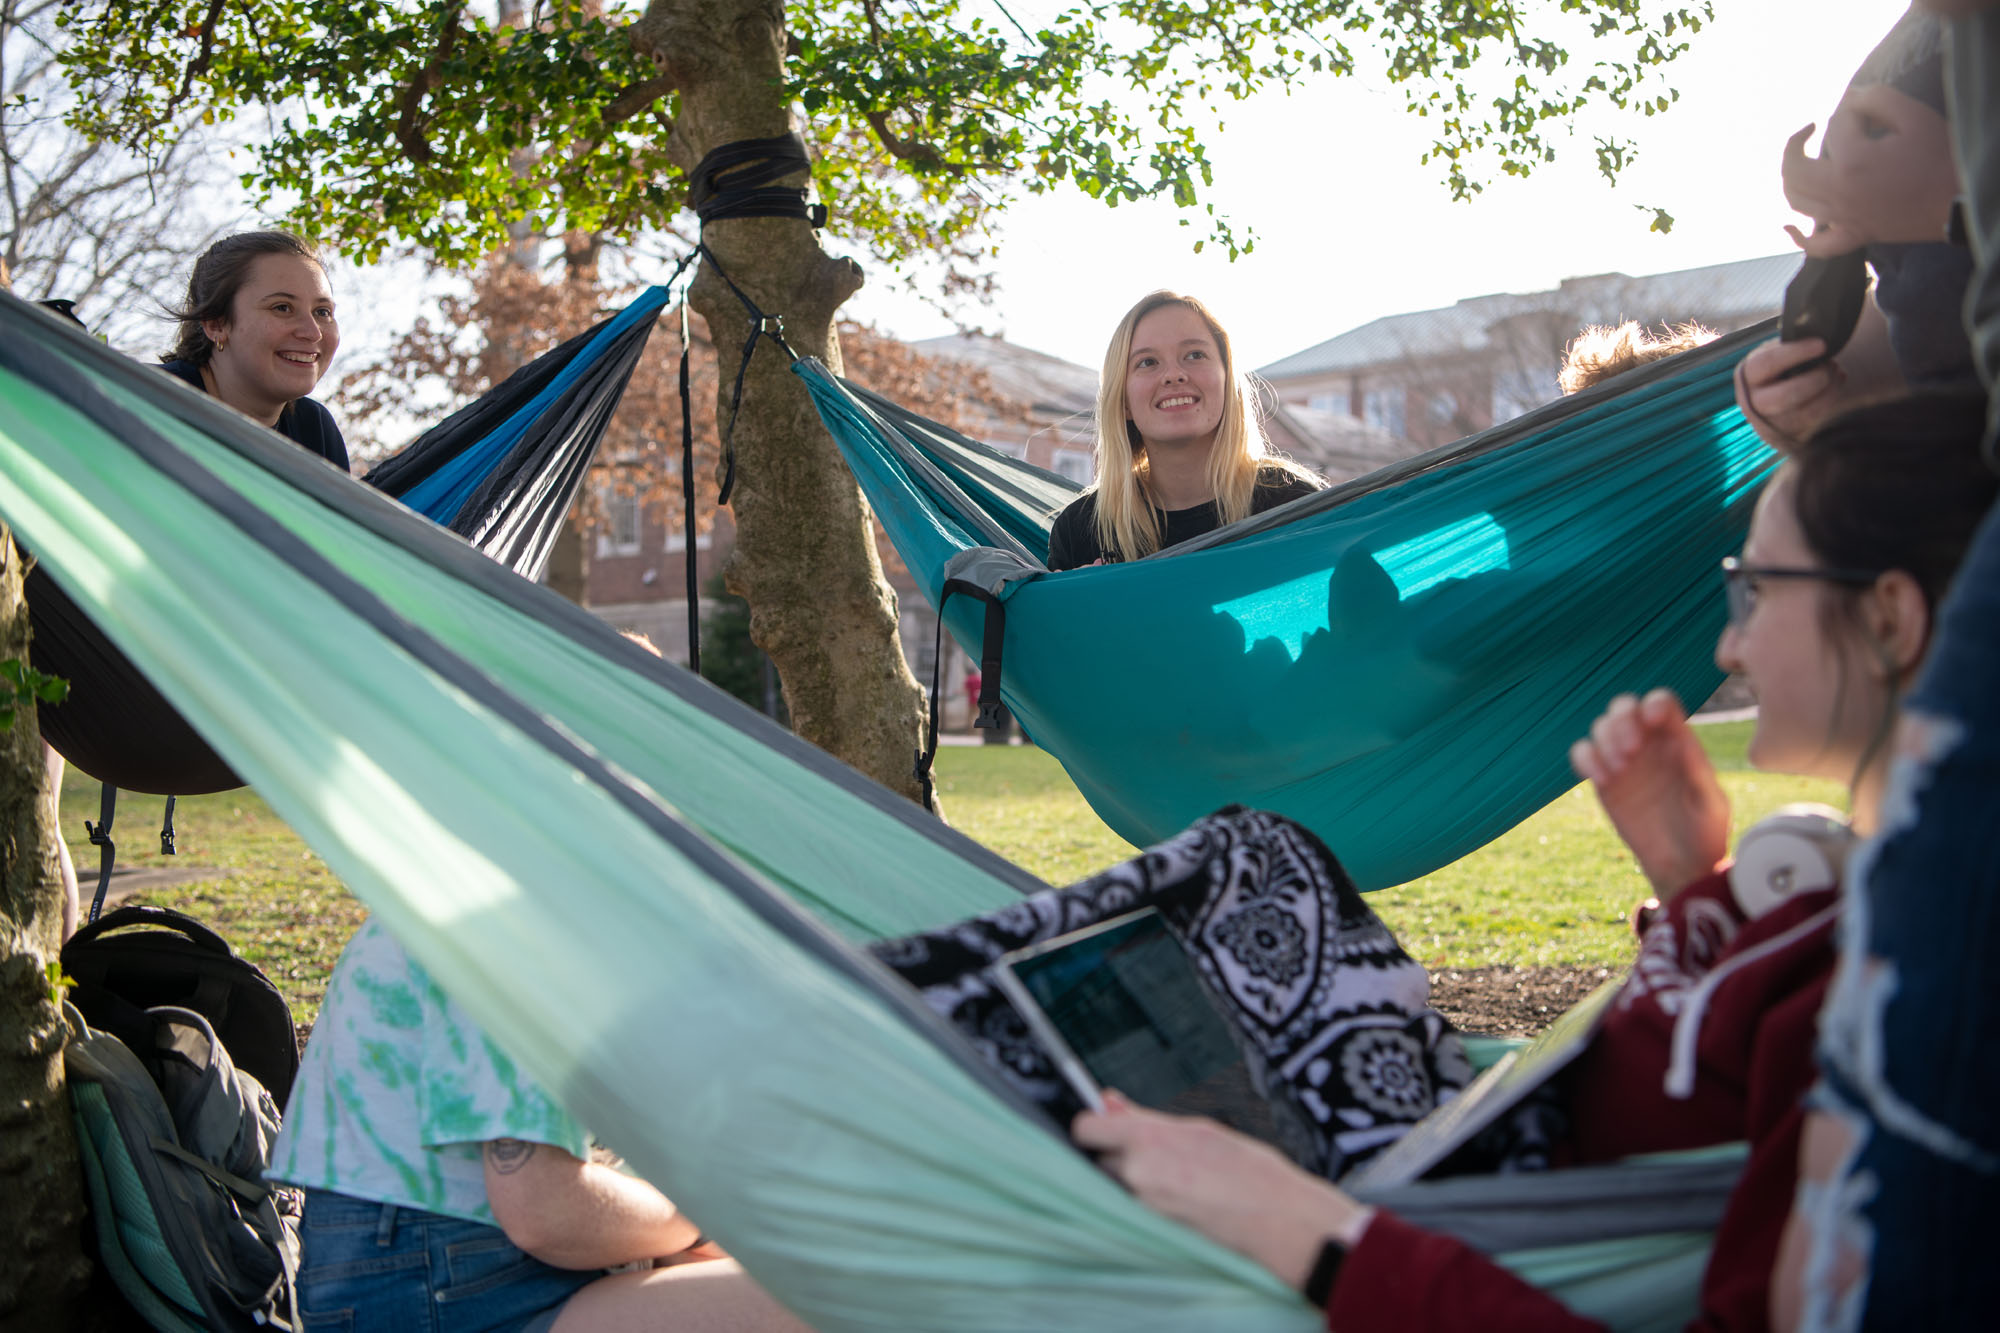 Students study and enjoy some down time together on College Green.